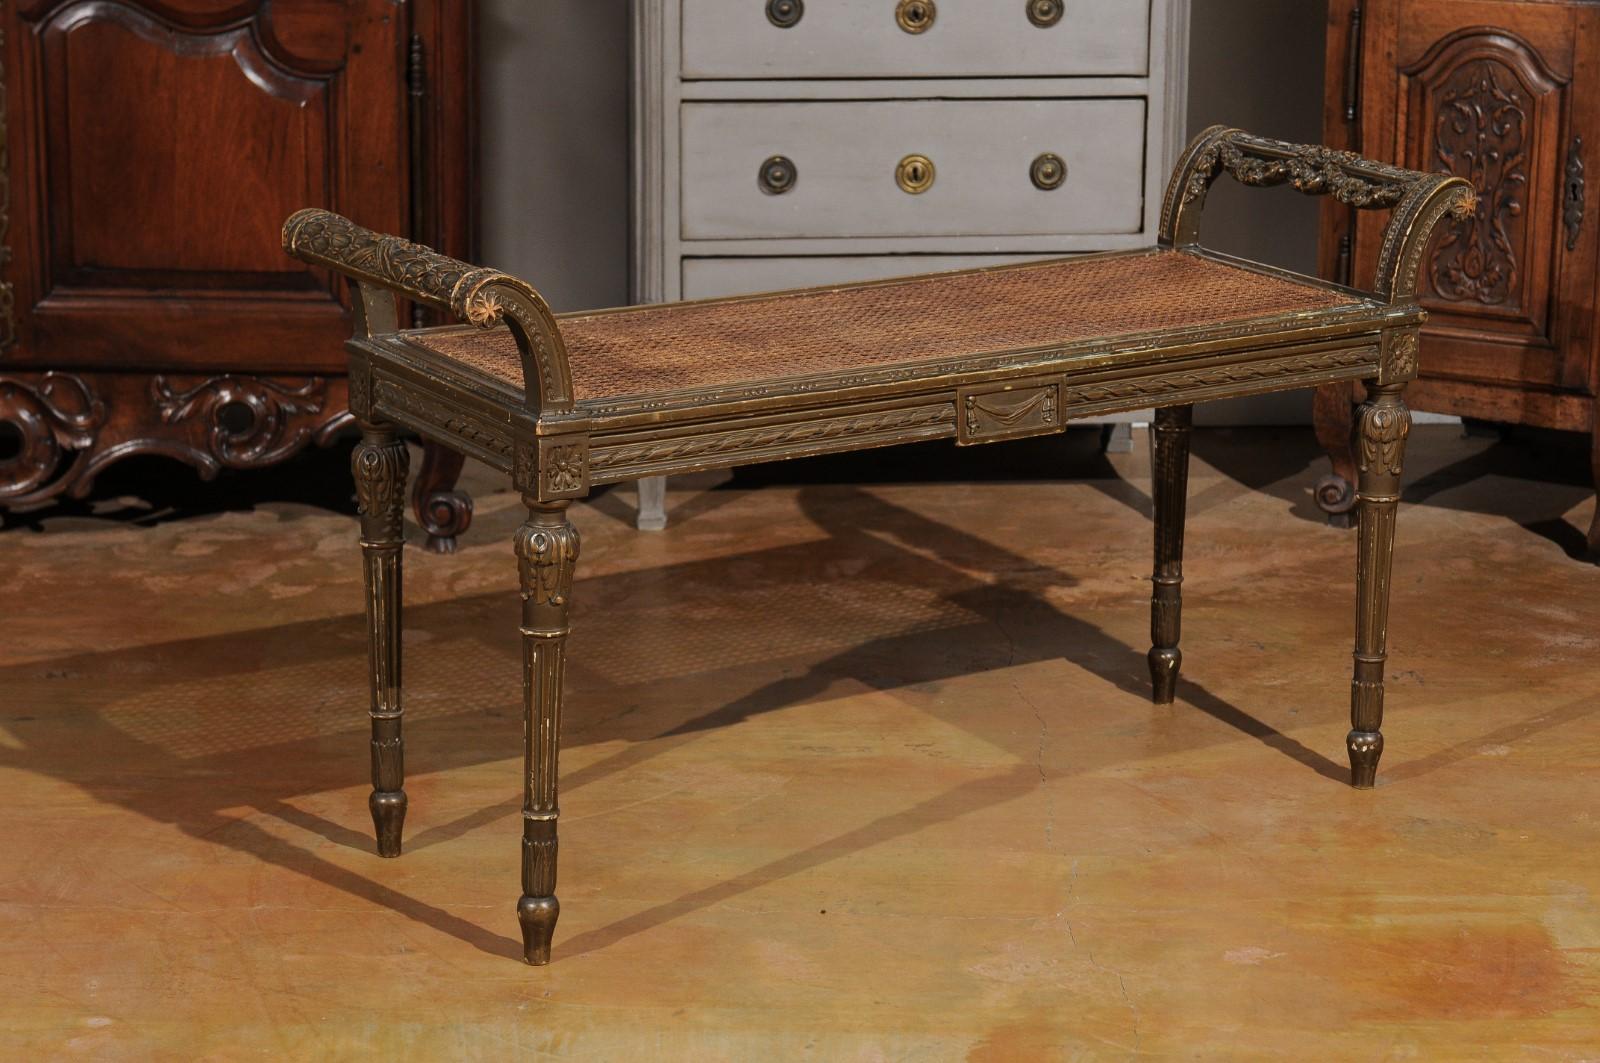 A French Louis XVI style carved wooden bench from the late 19th century, with cane seat and fluted legs. Born in France during the last quarter of the 19th century, this exquisite Louis XVI style bench features a rectangular cane seat flanked